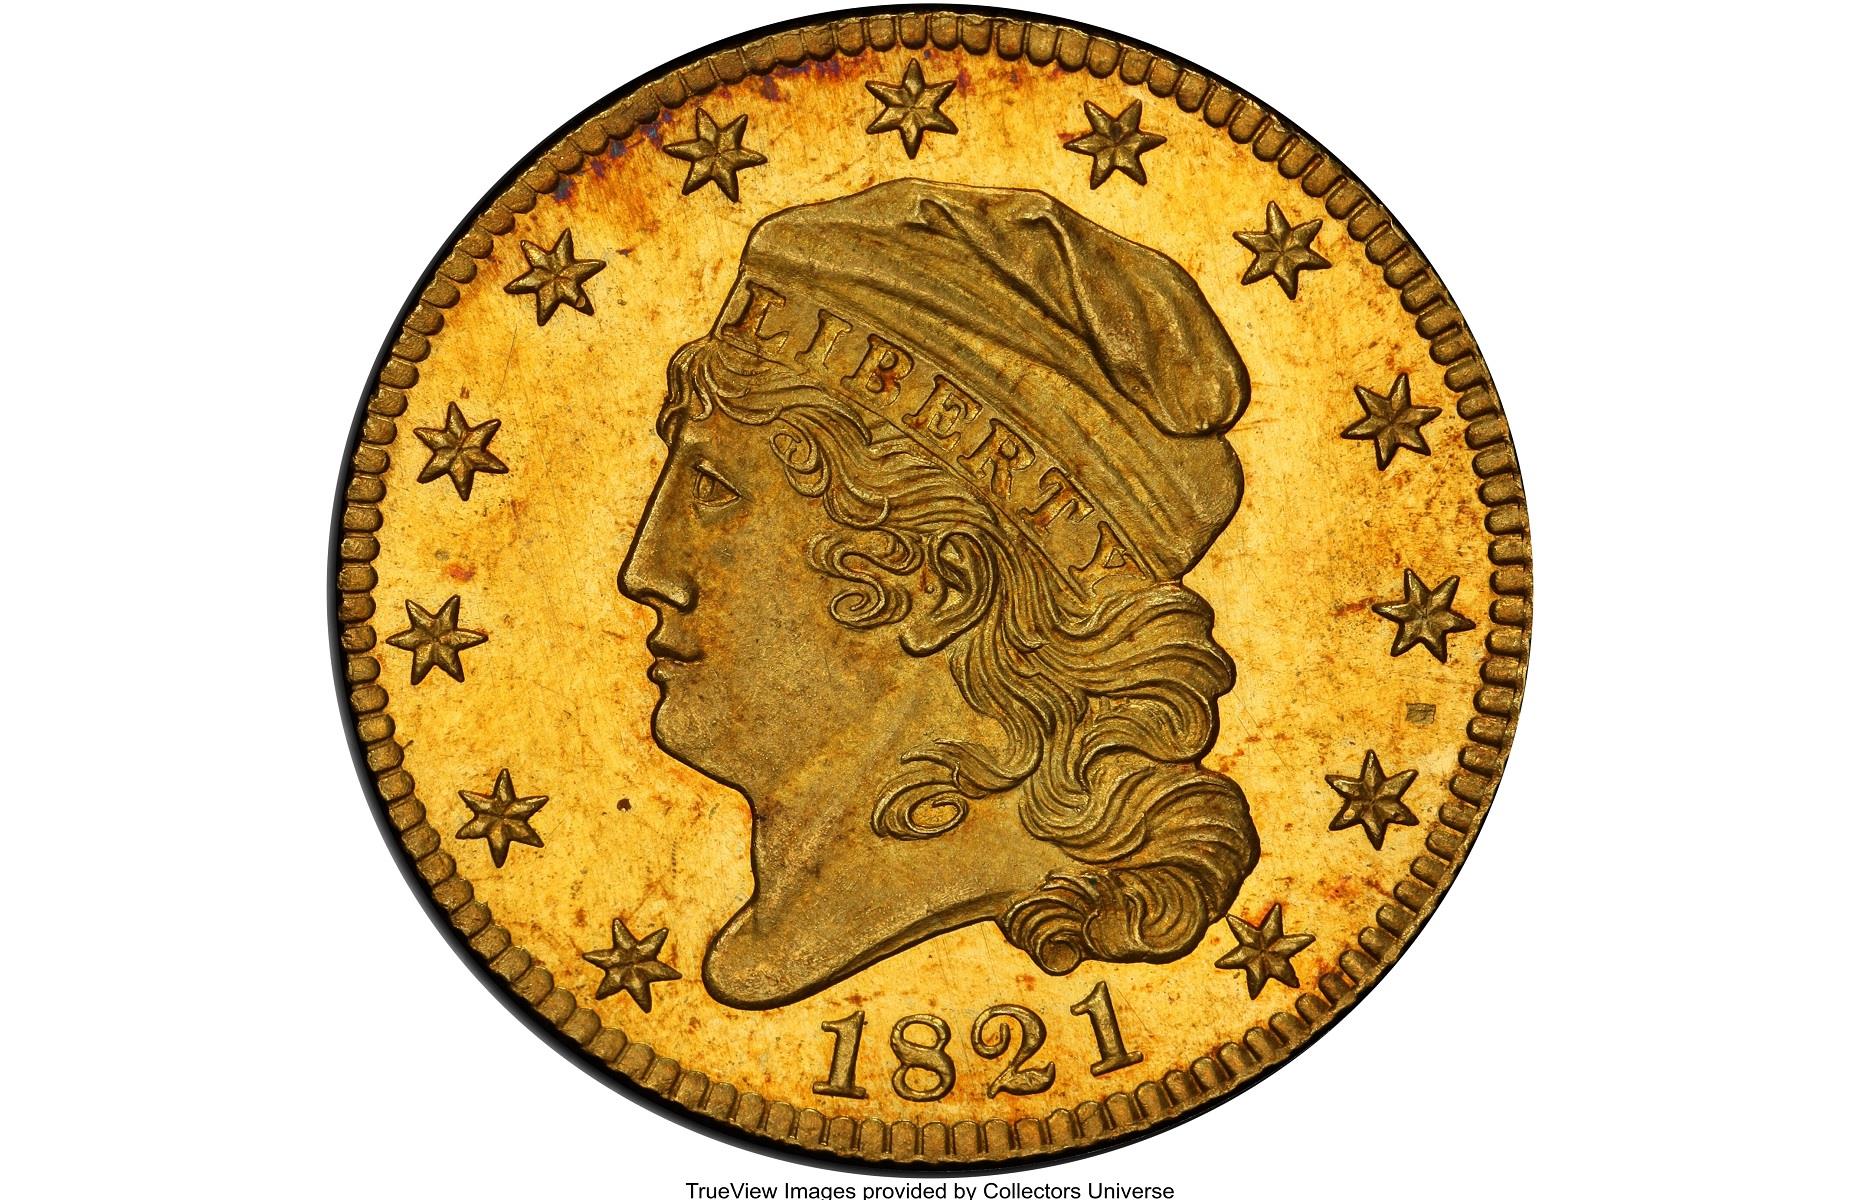 1821 Capped Head $5 coin: $4.62 million